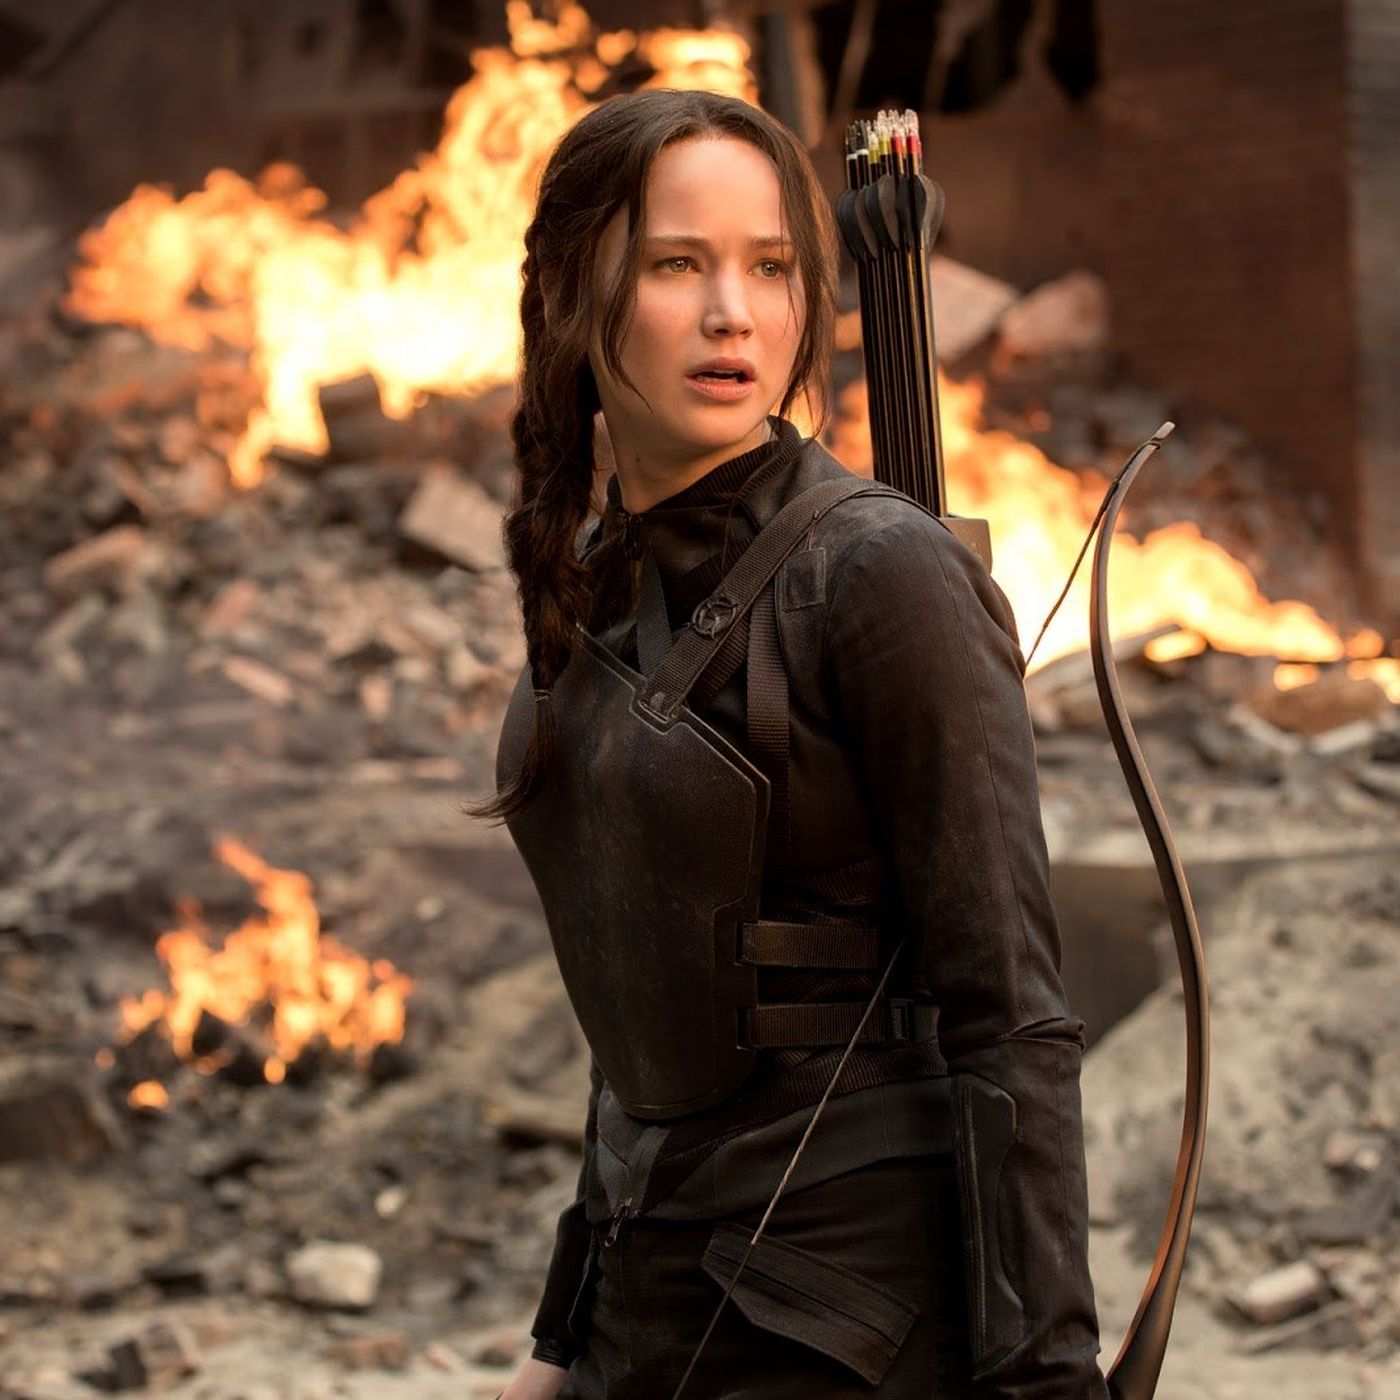 Watch it before it leaves: 'The Hunger Games' – Three Penny Press